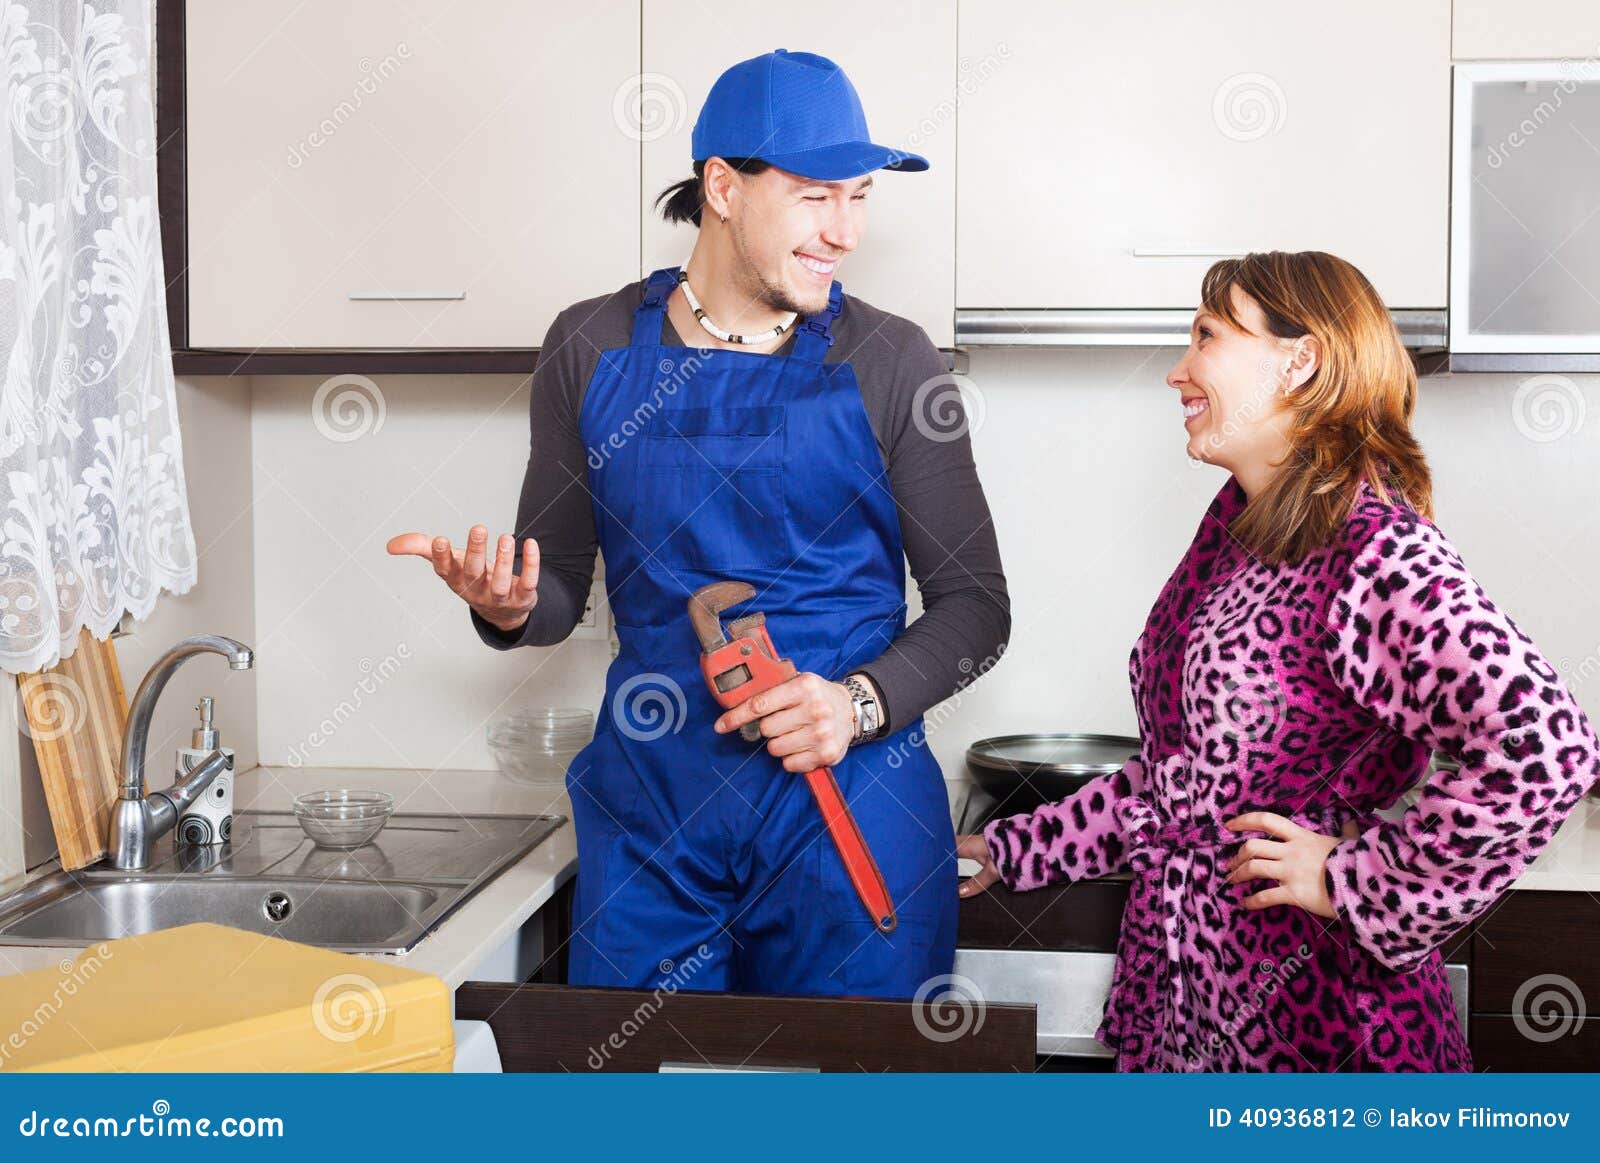 housewife and the plumber